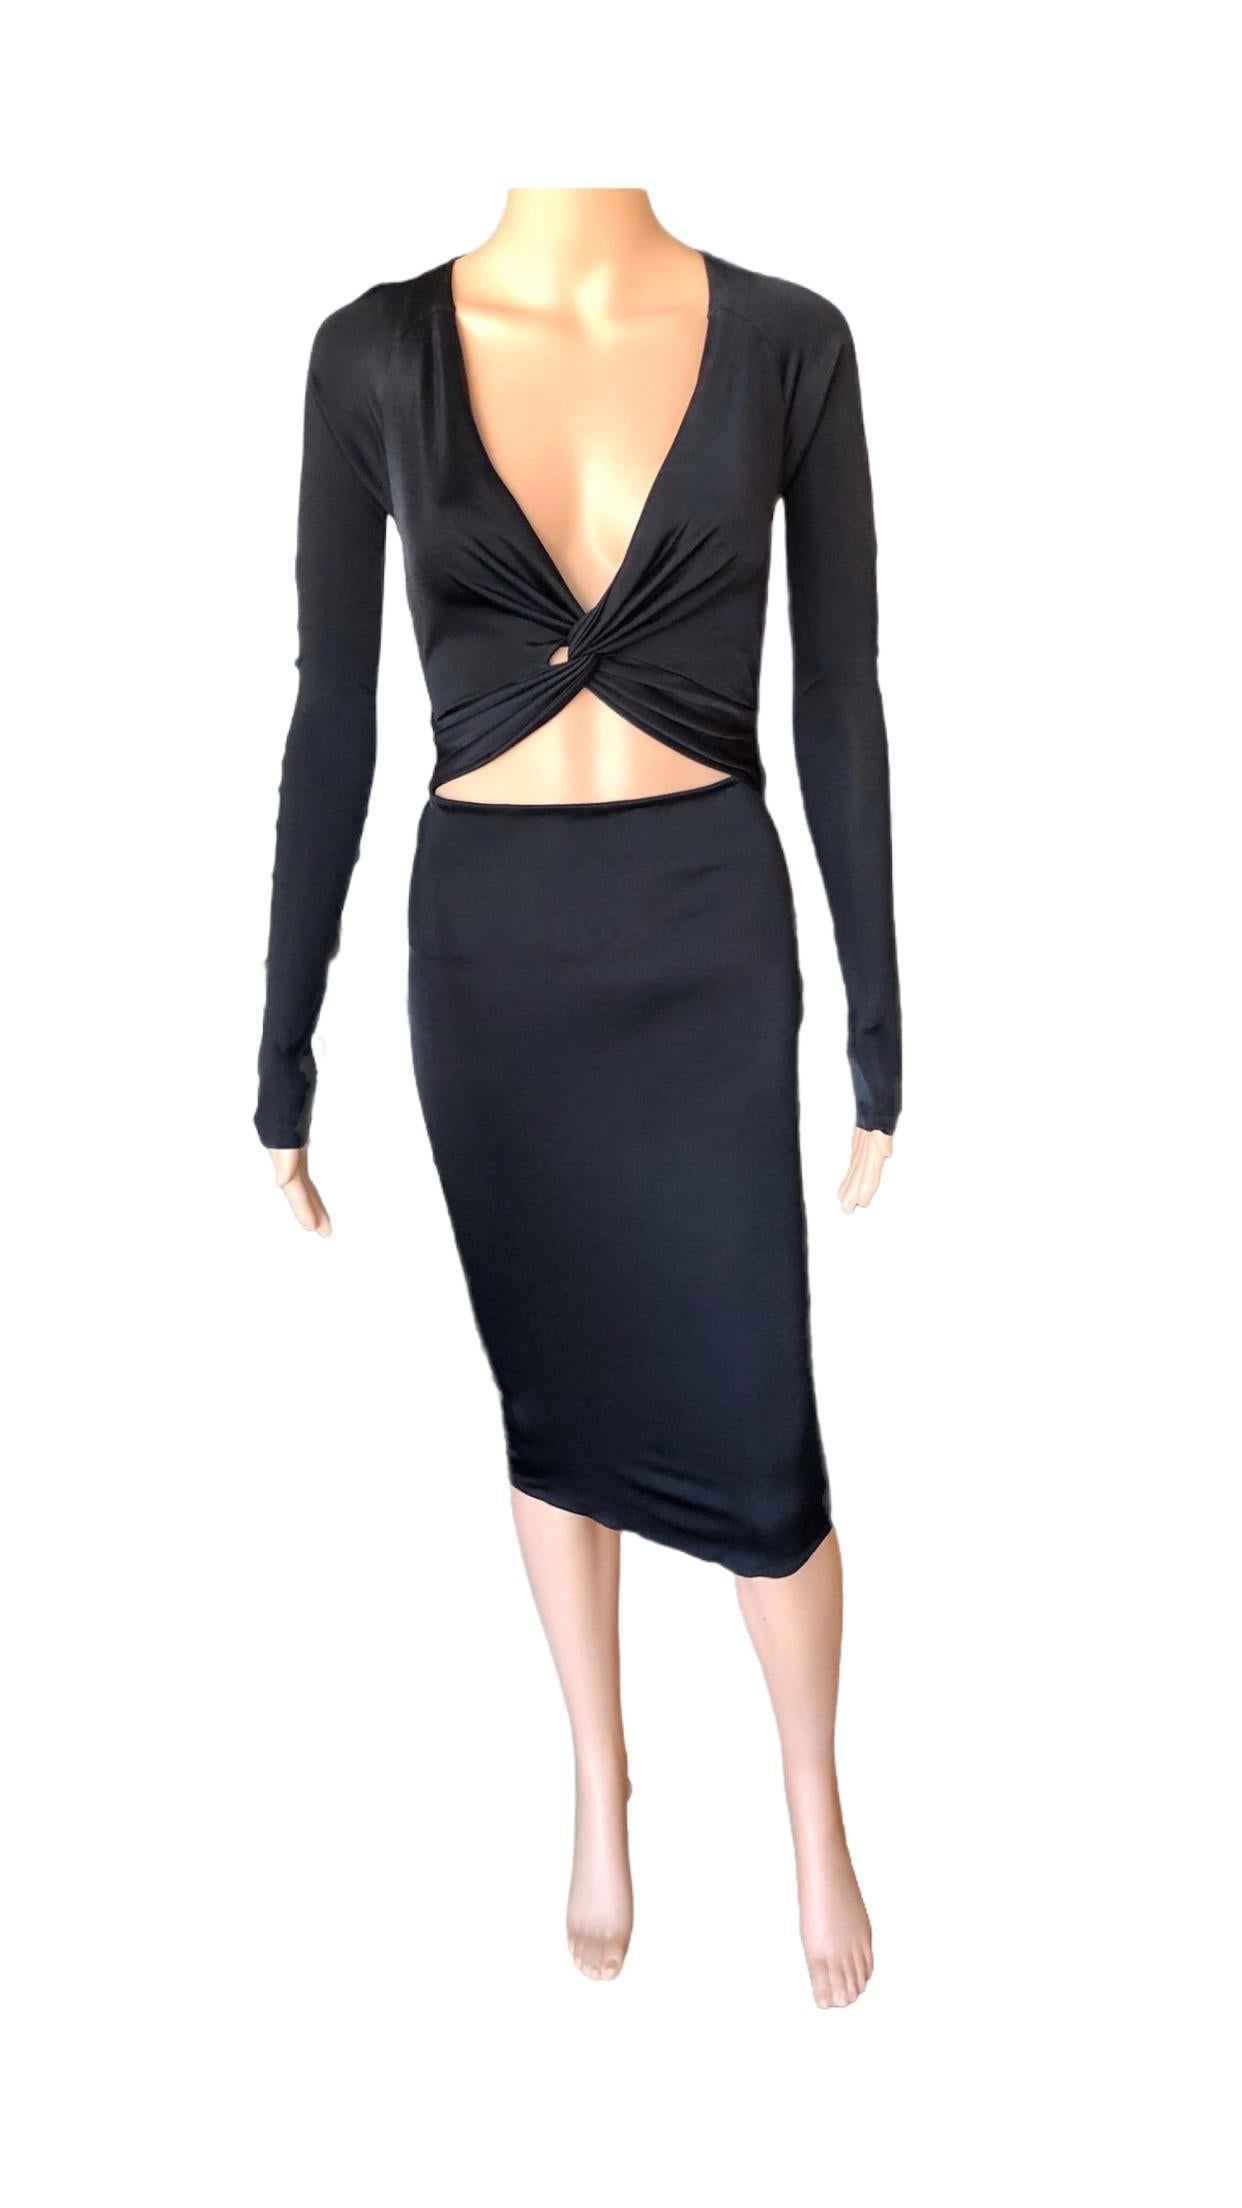 Gucci S/S 2005 Tom Ford Plunging Cutout Backless Bodycon Black Dress For Sale 8